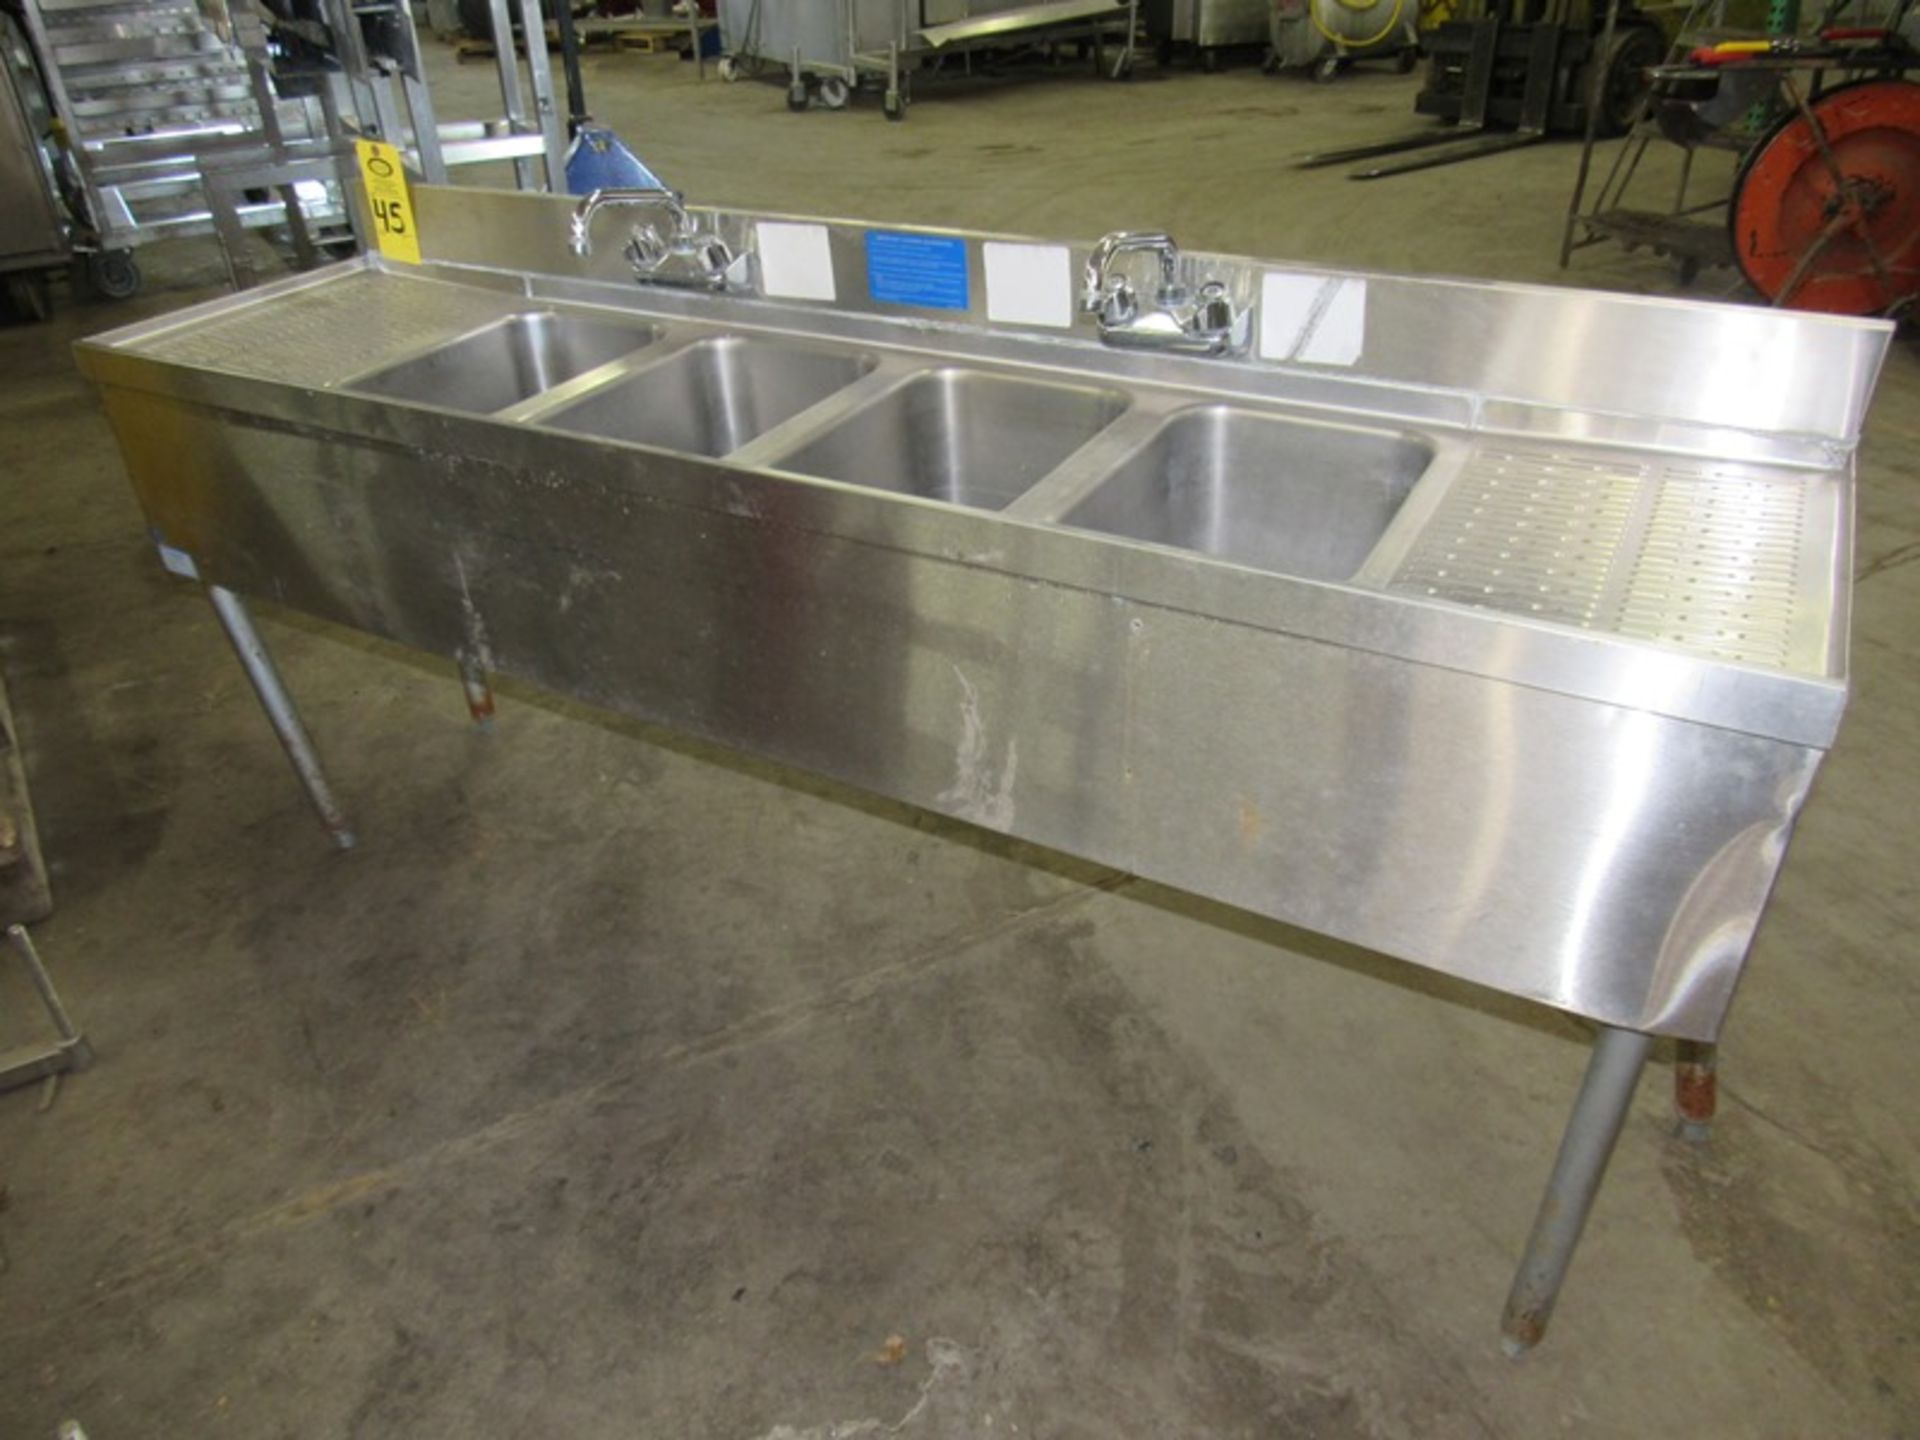 Stainless Steel Bar Sink, 4 bays, 2 faucets, 19” wide x 6’ long x 34” tall No Skidding Available